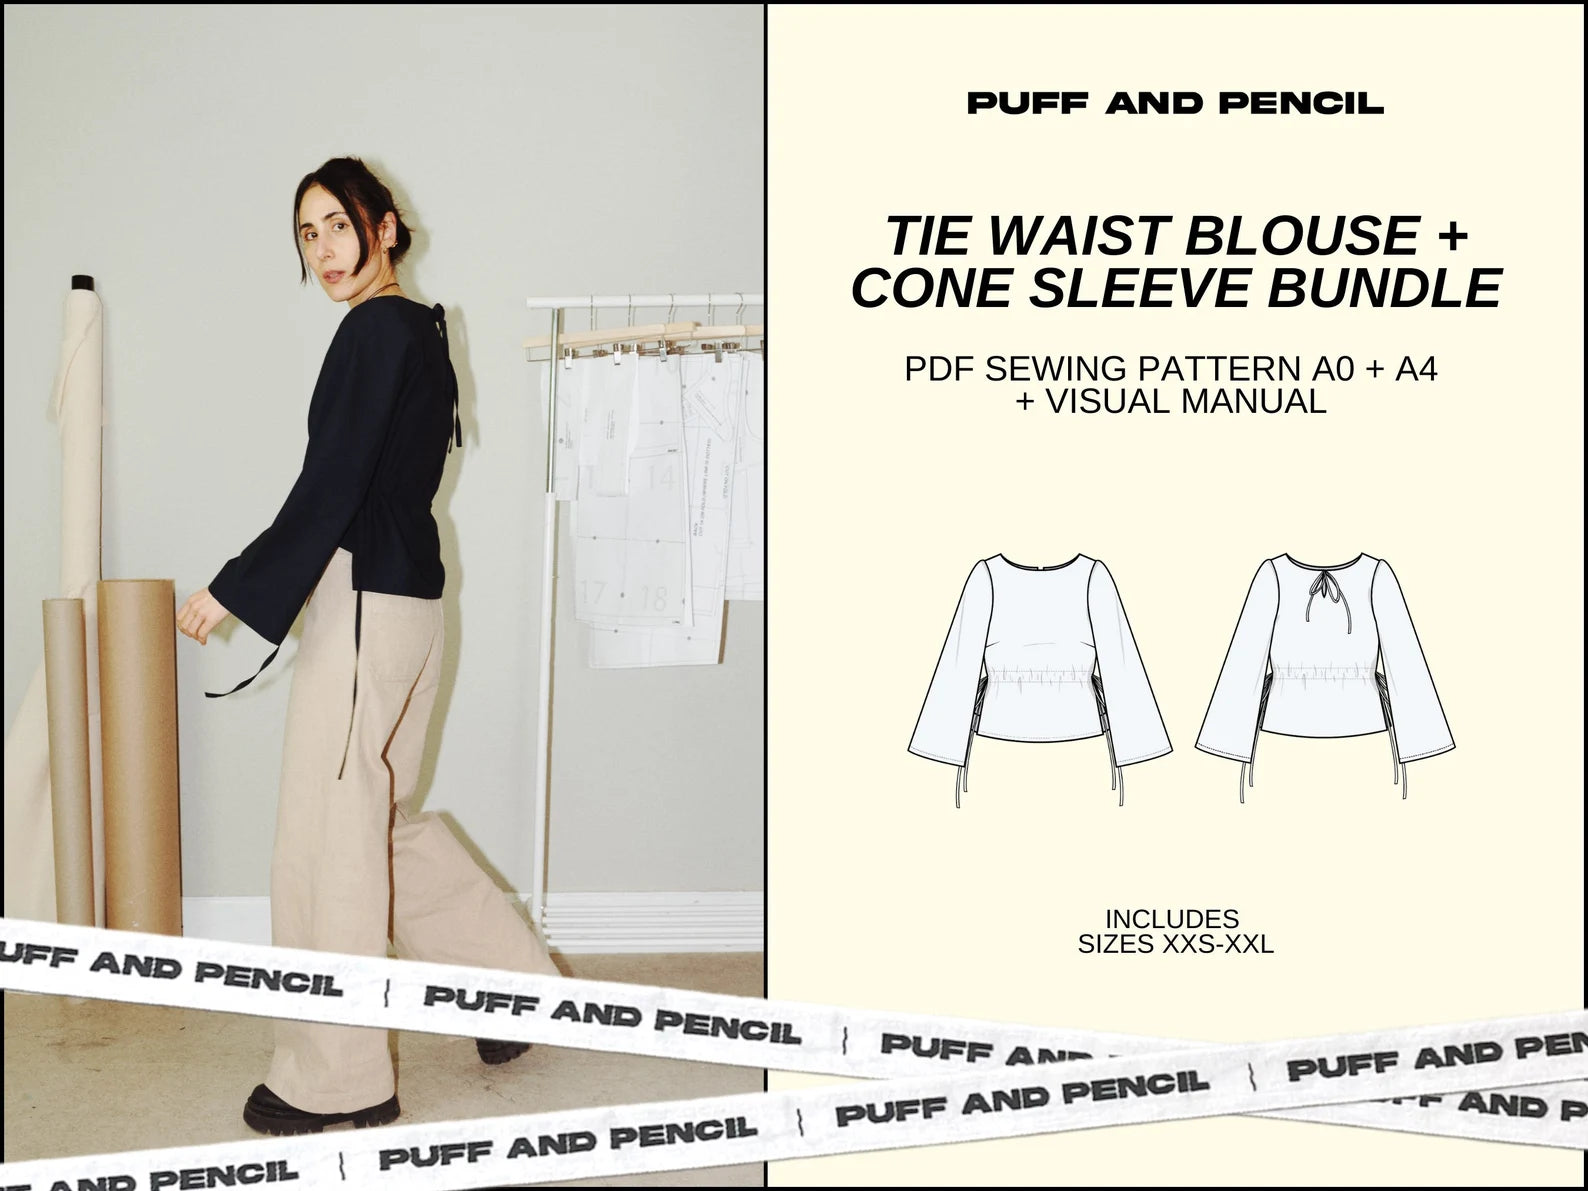 Puff and Pencil Tie Waist Blouse & Cone Sleeve